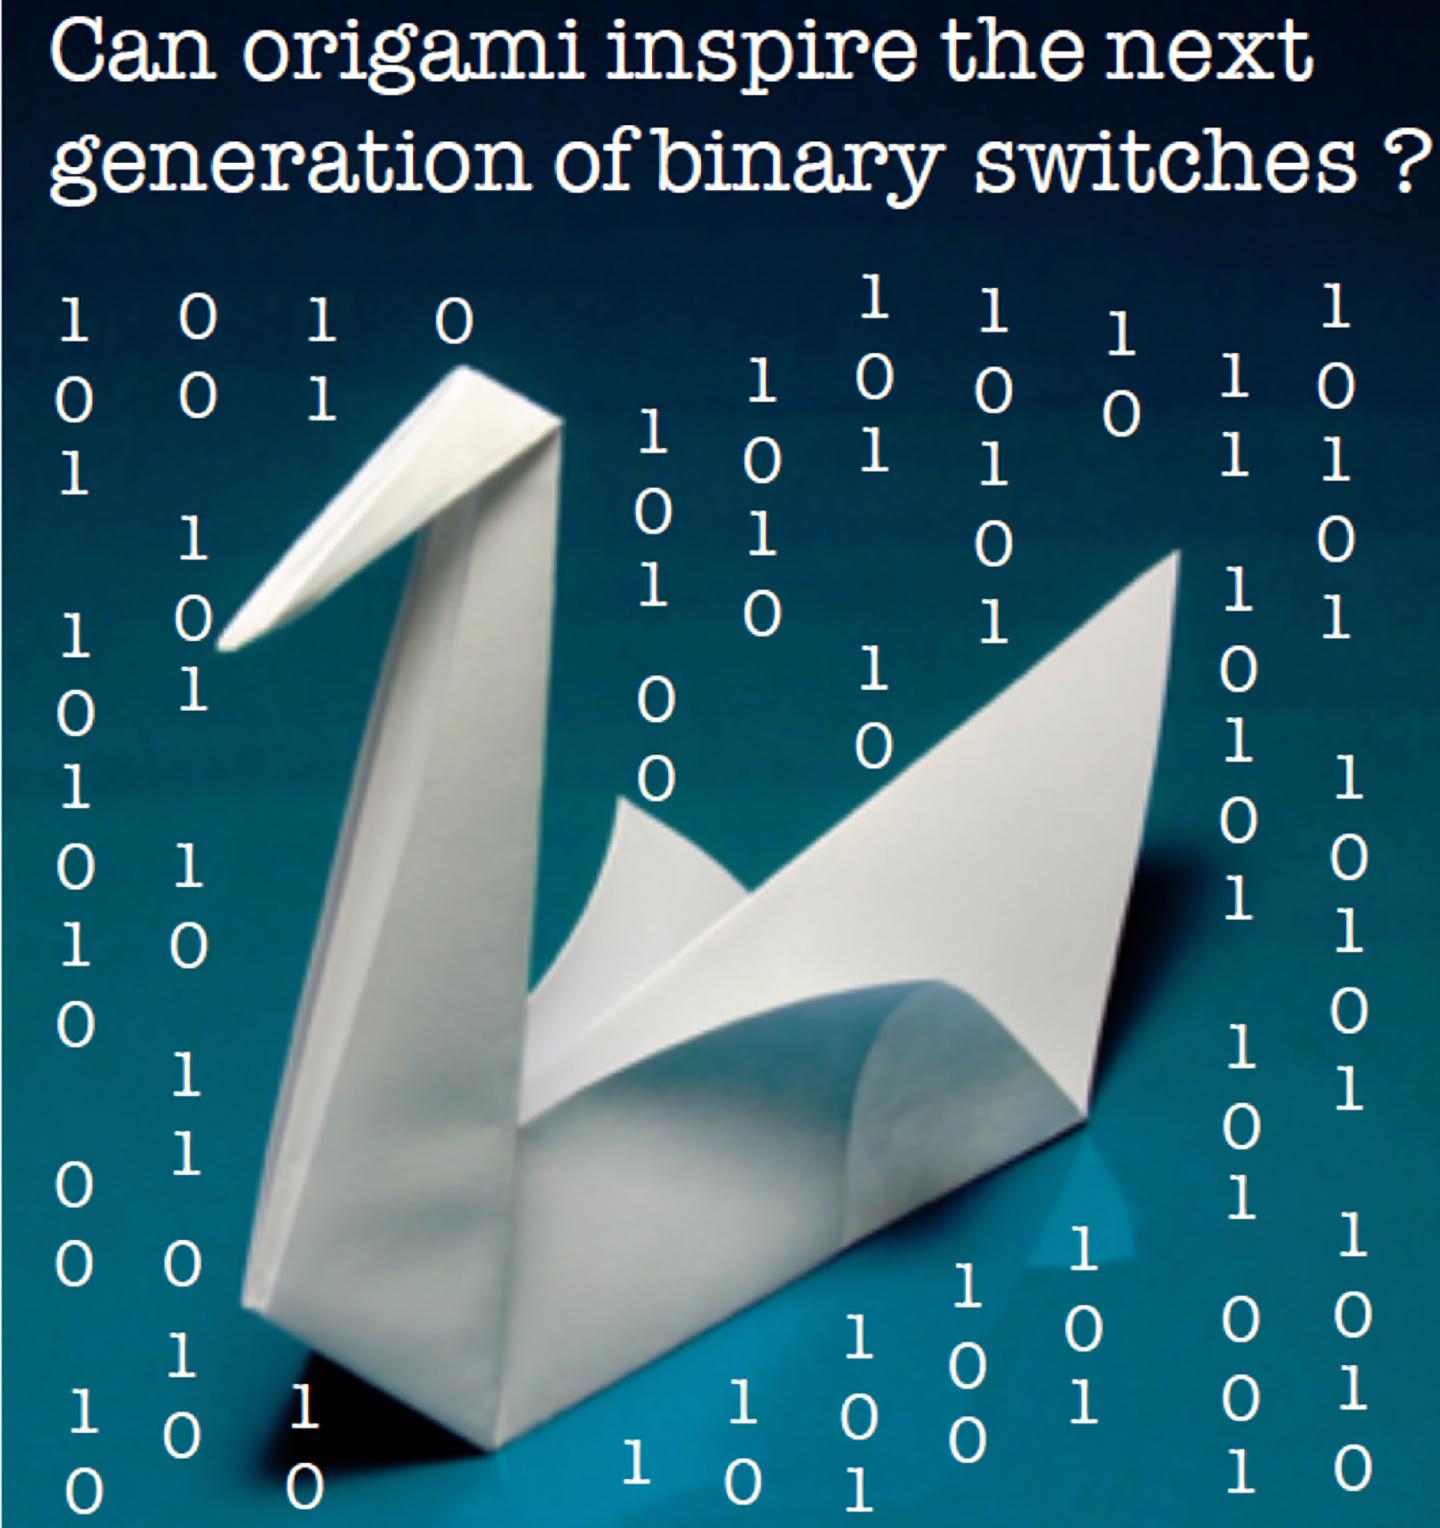 Origami-Inspired Binary Switches